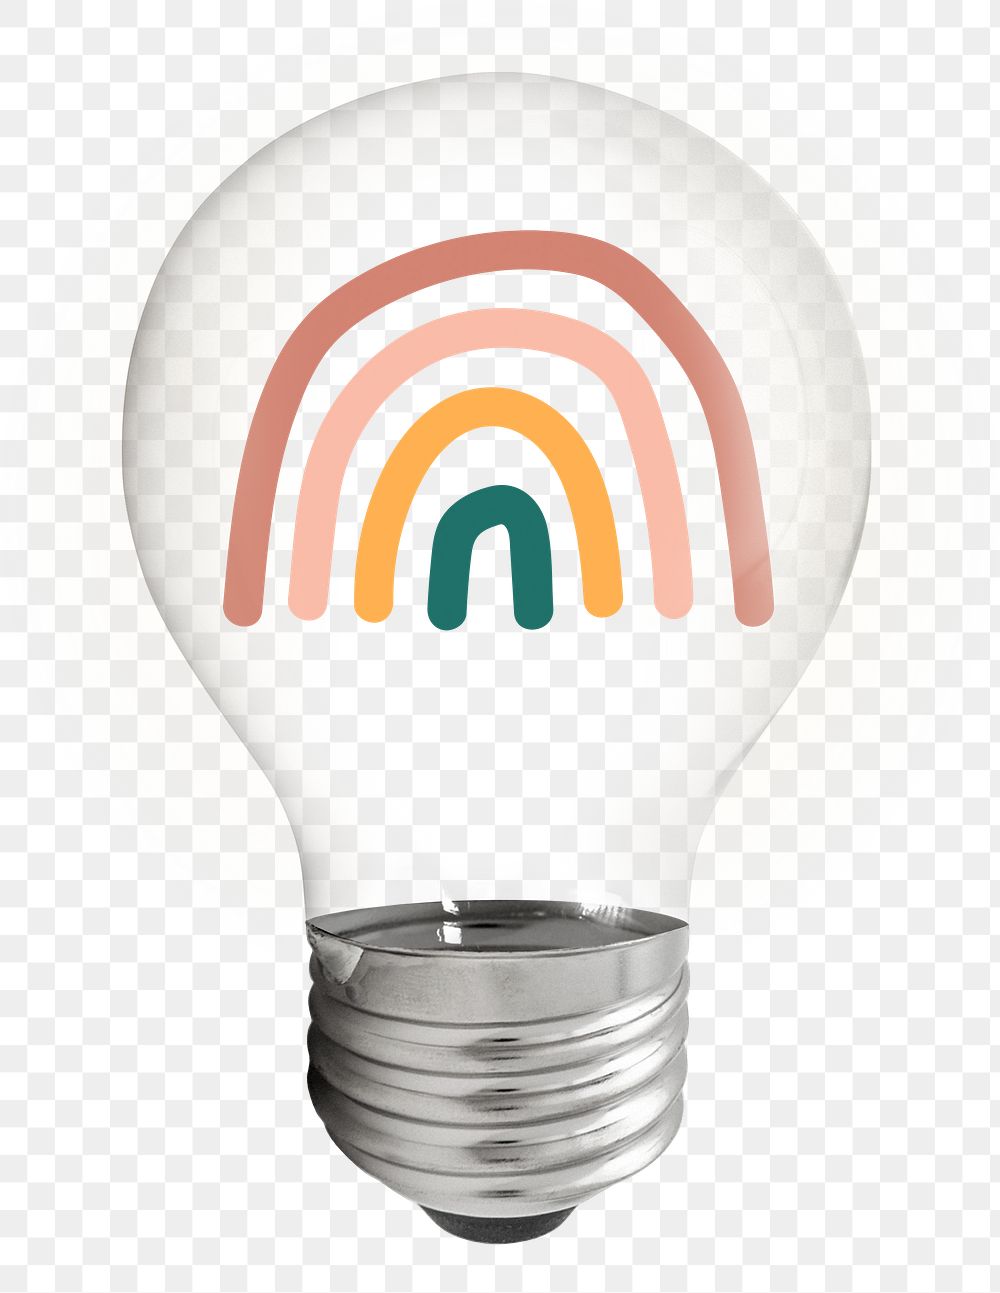 Rainbow doodle png sticker, light bulb collage on transparent background